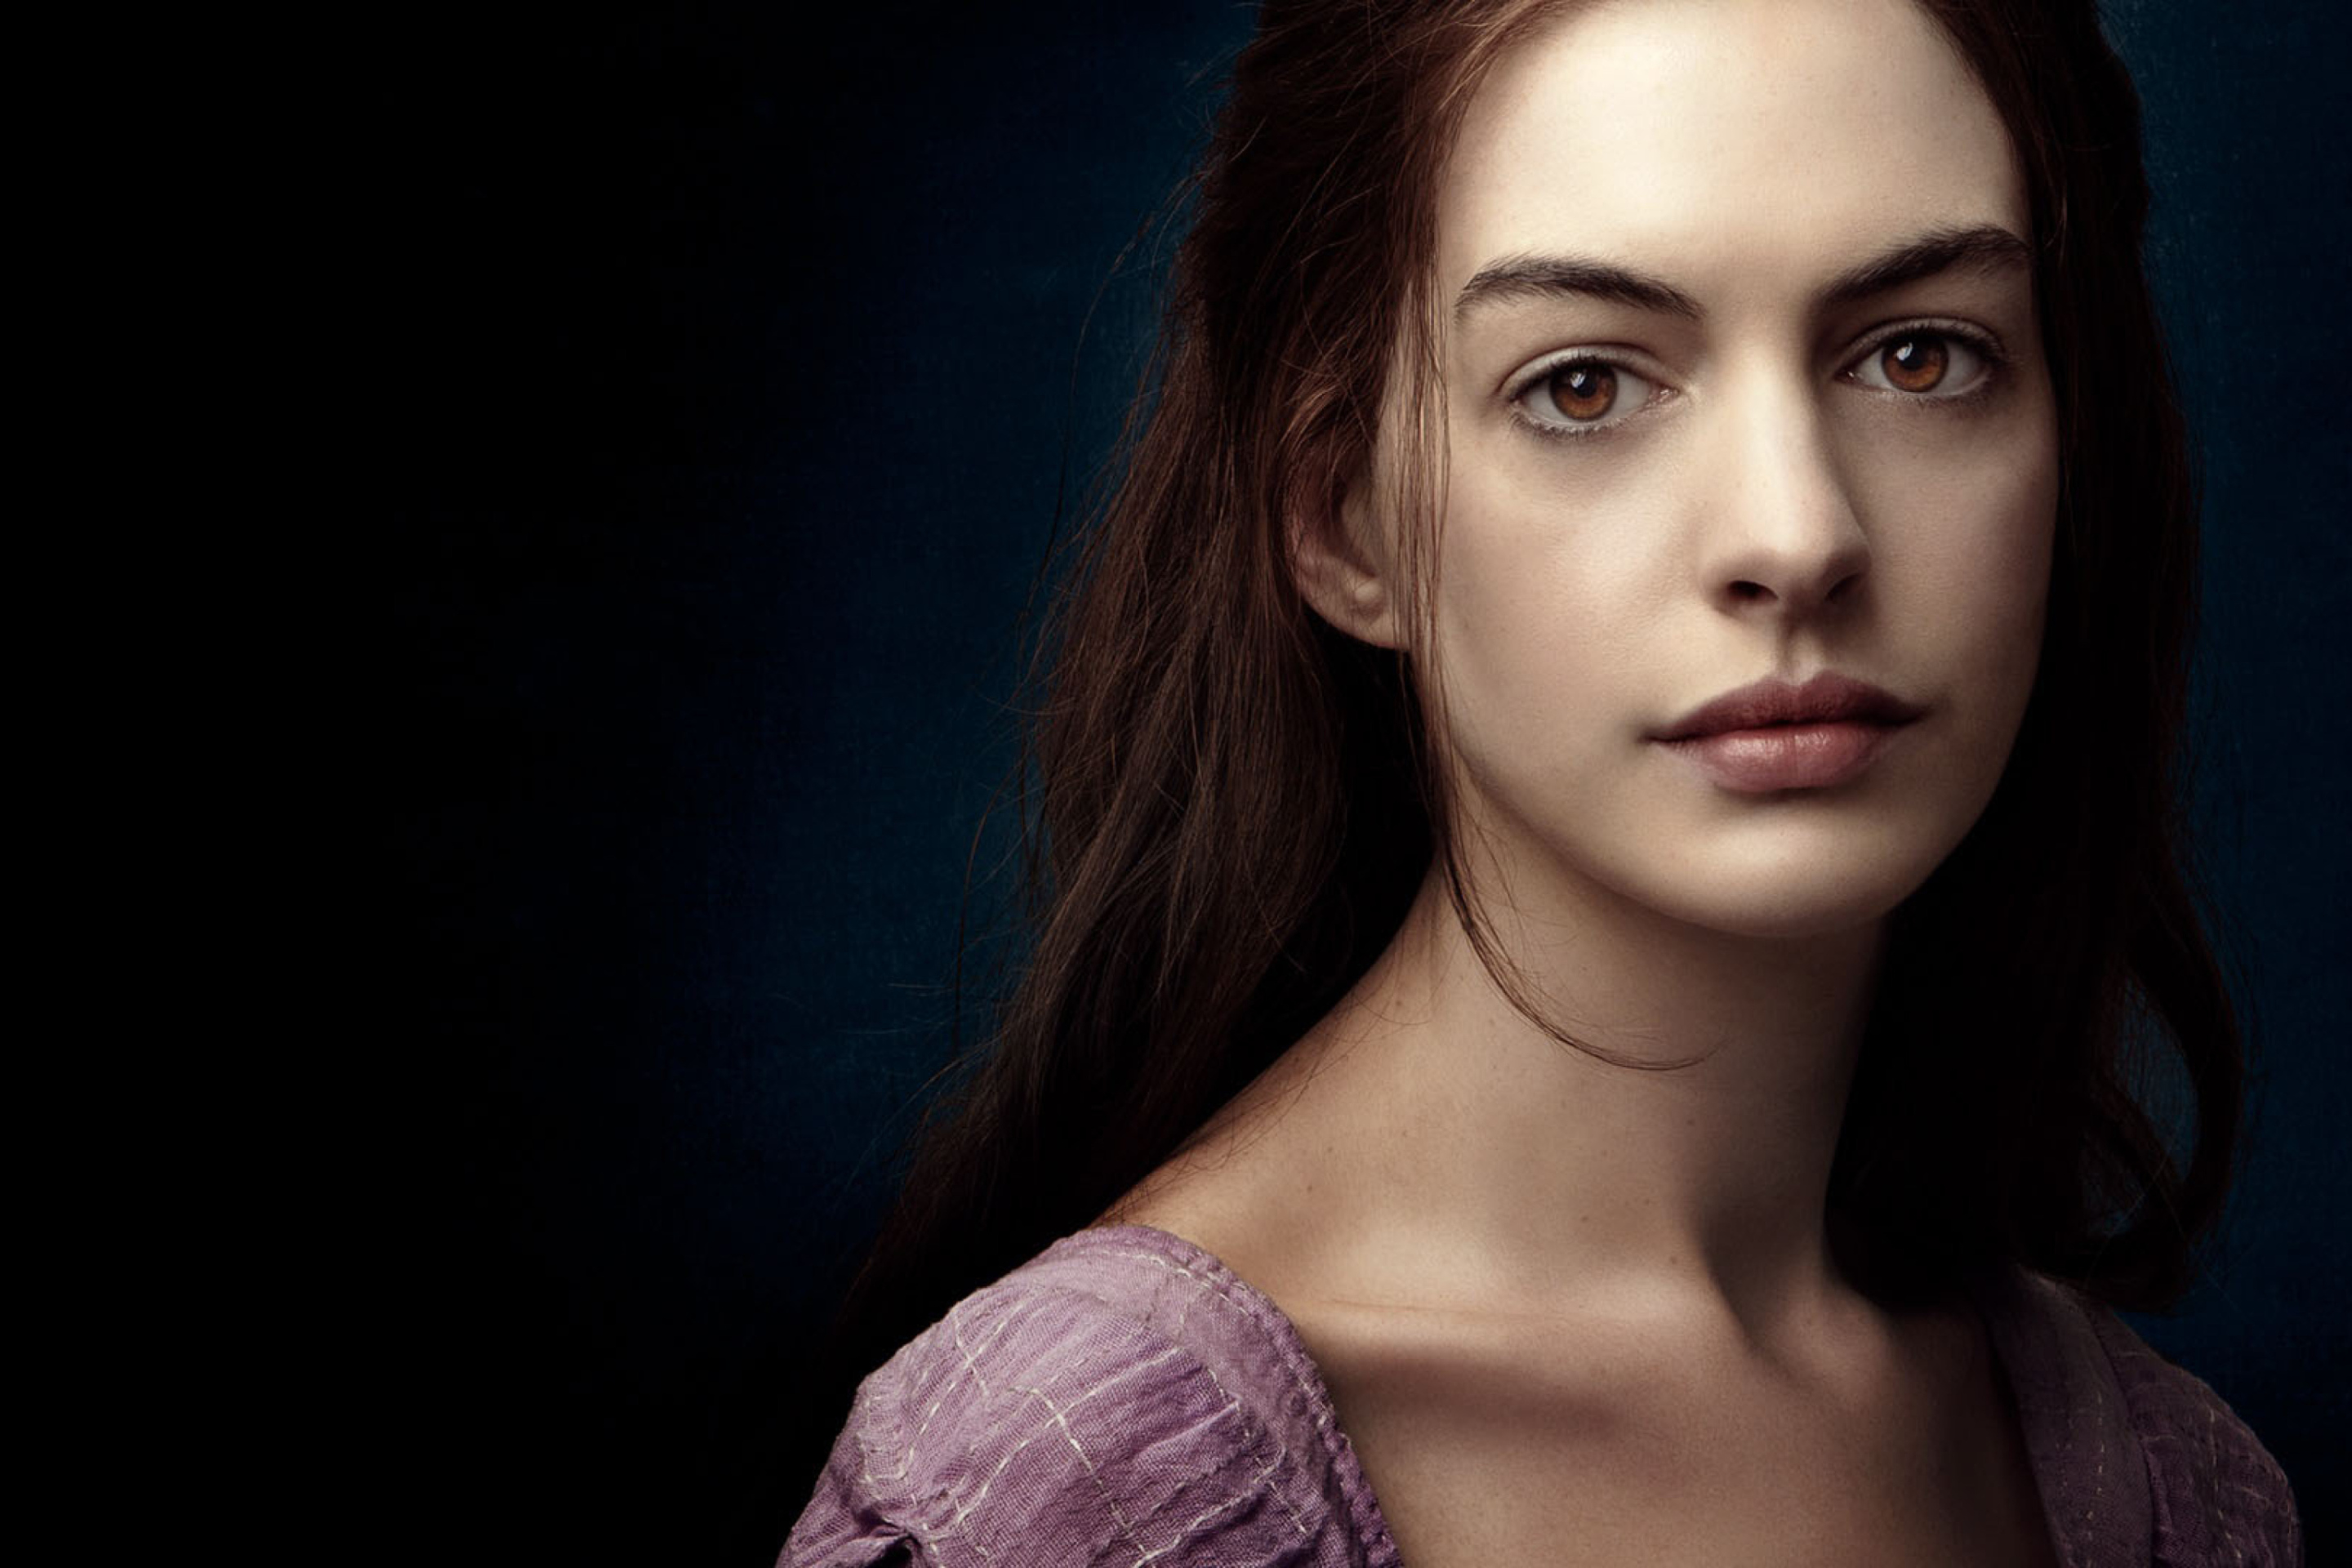 Anne Hathaway In Les Miserables wallpaper 2880x1920